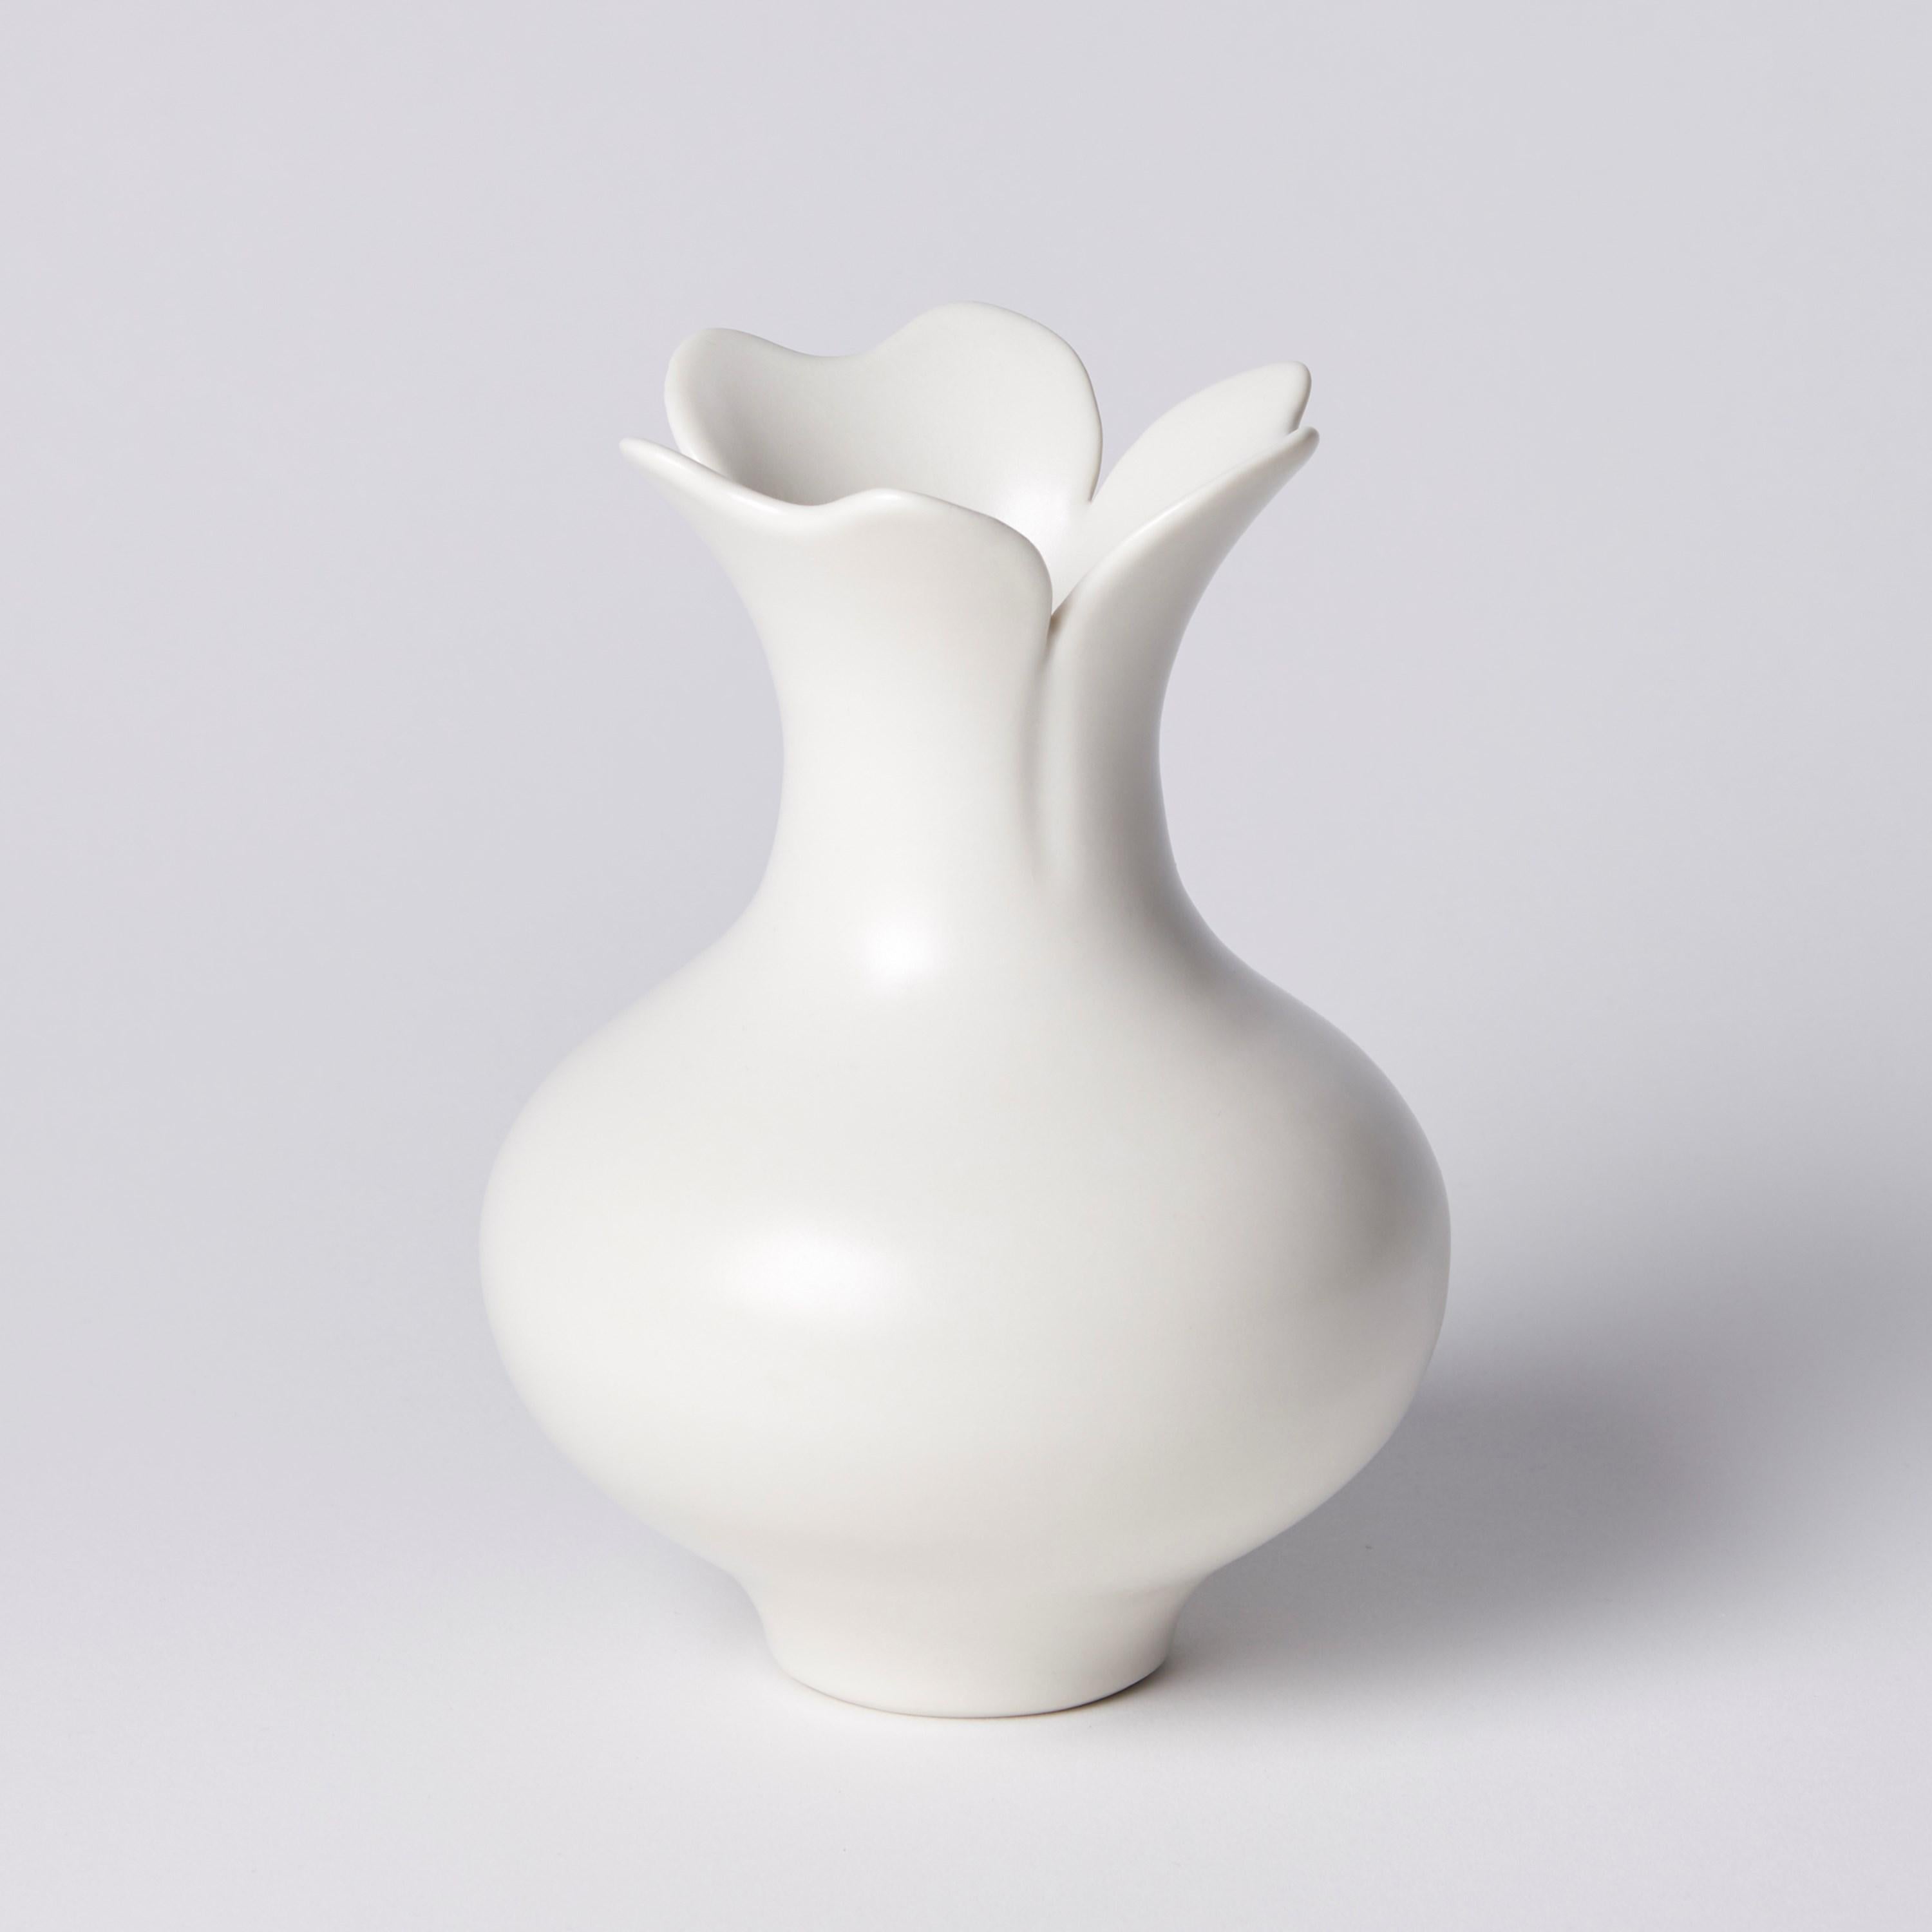 ‘Vase with Three Petal Rim' is a unique porcelain sculptural vessel by the British artist, Vivienne Foley. 

Vivienne Foley is based in Gloucestershire where she produces exquisite ceramic sculpture. Although in essence they are often functional